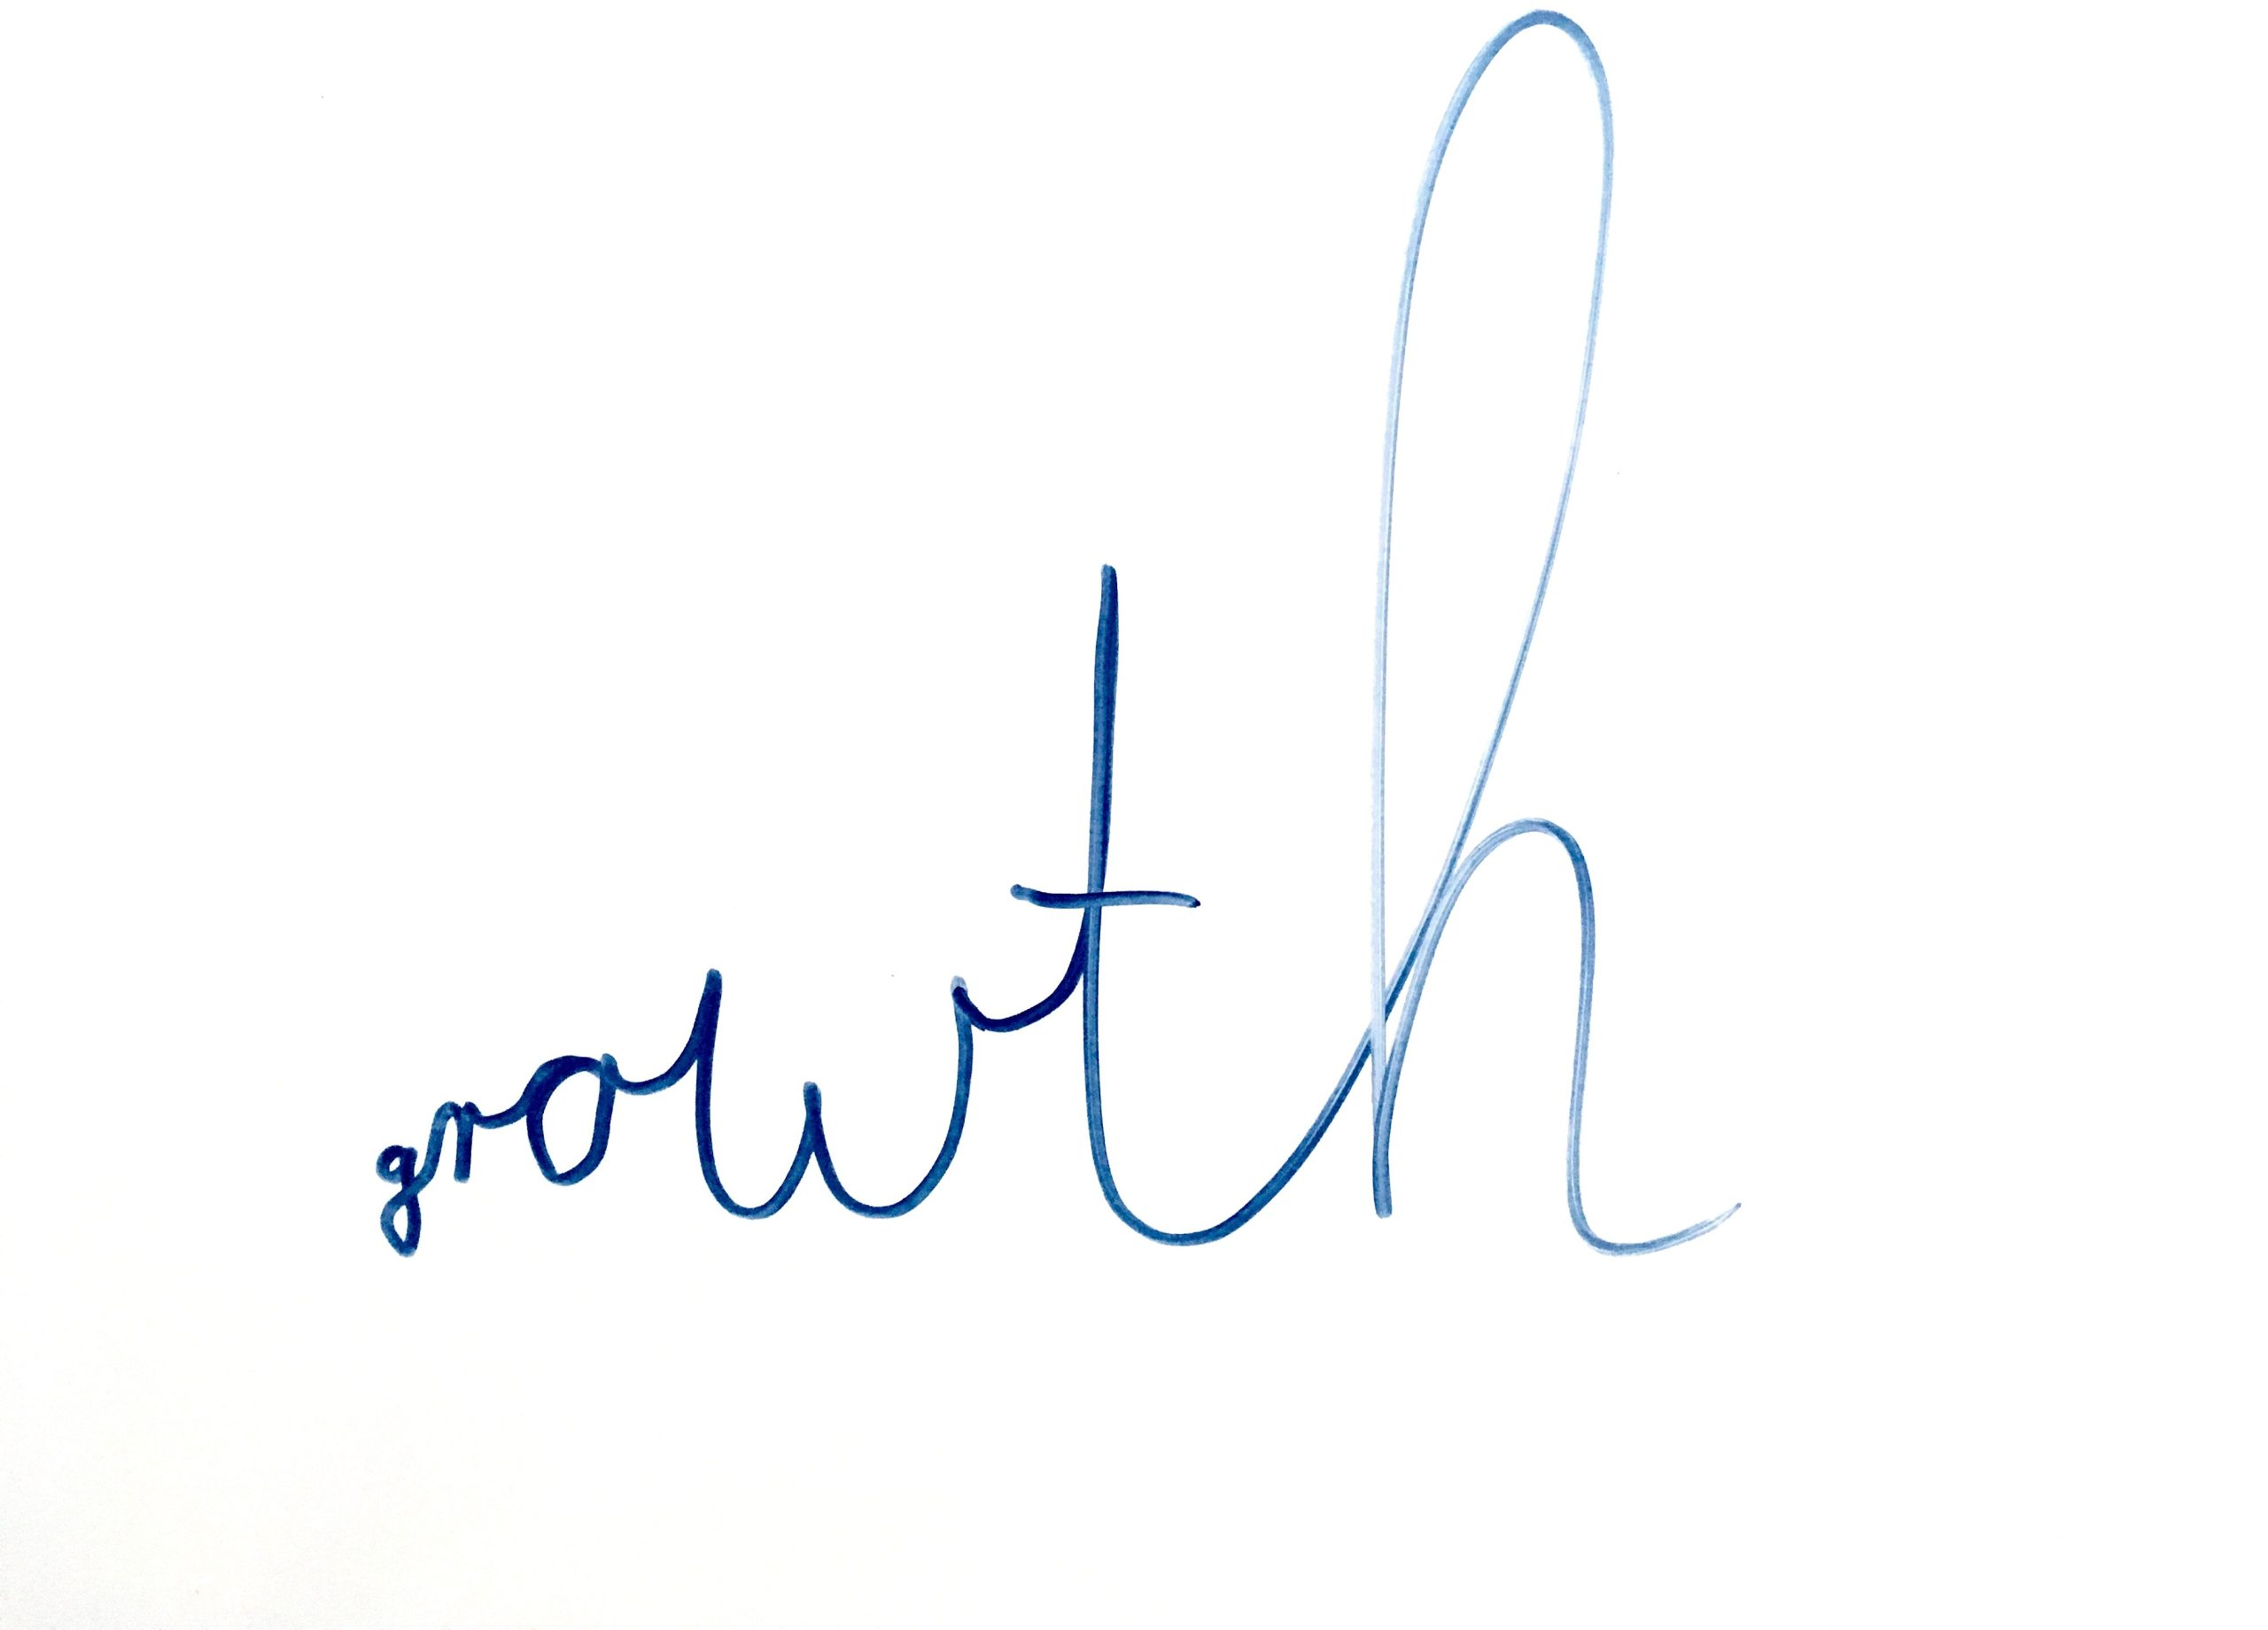 What’s a growth rate, really?